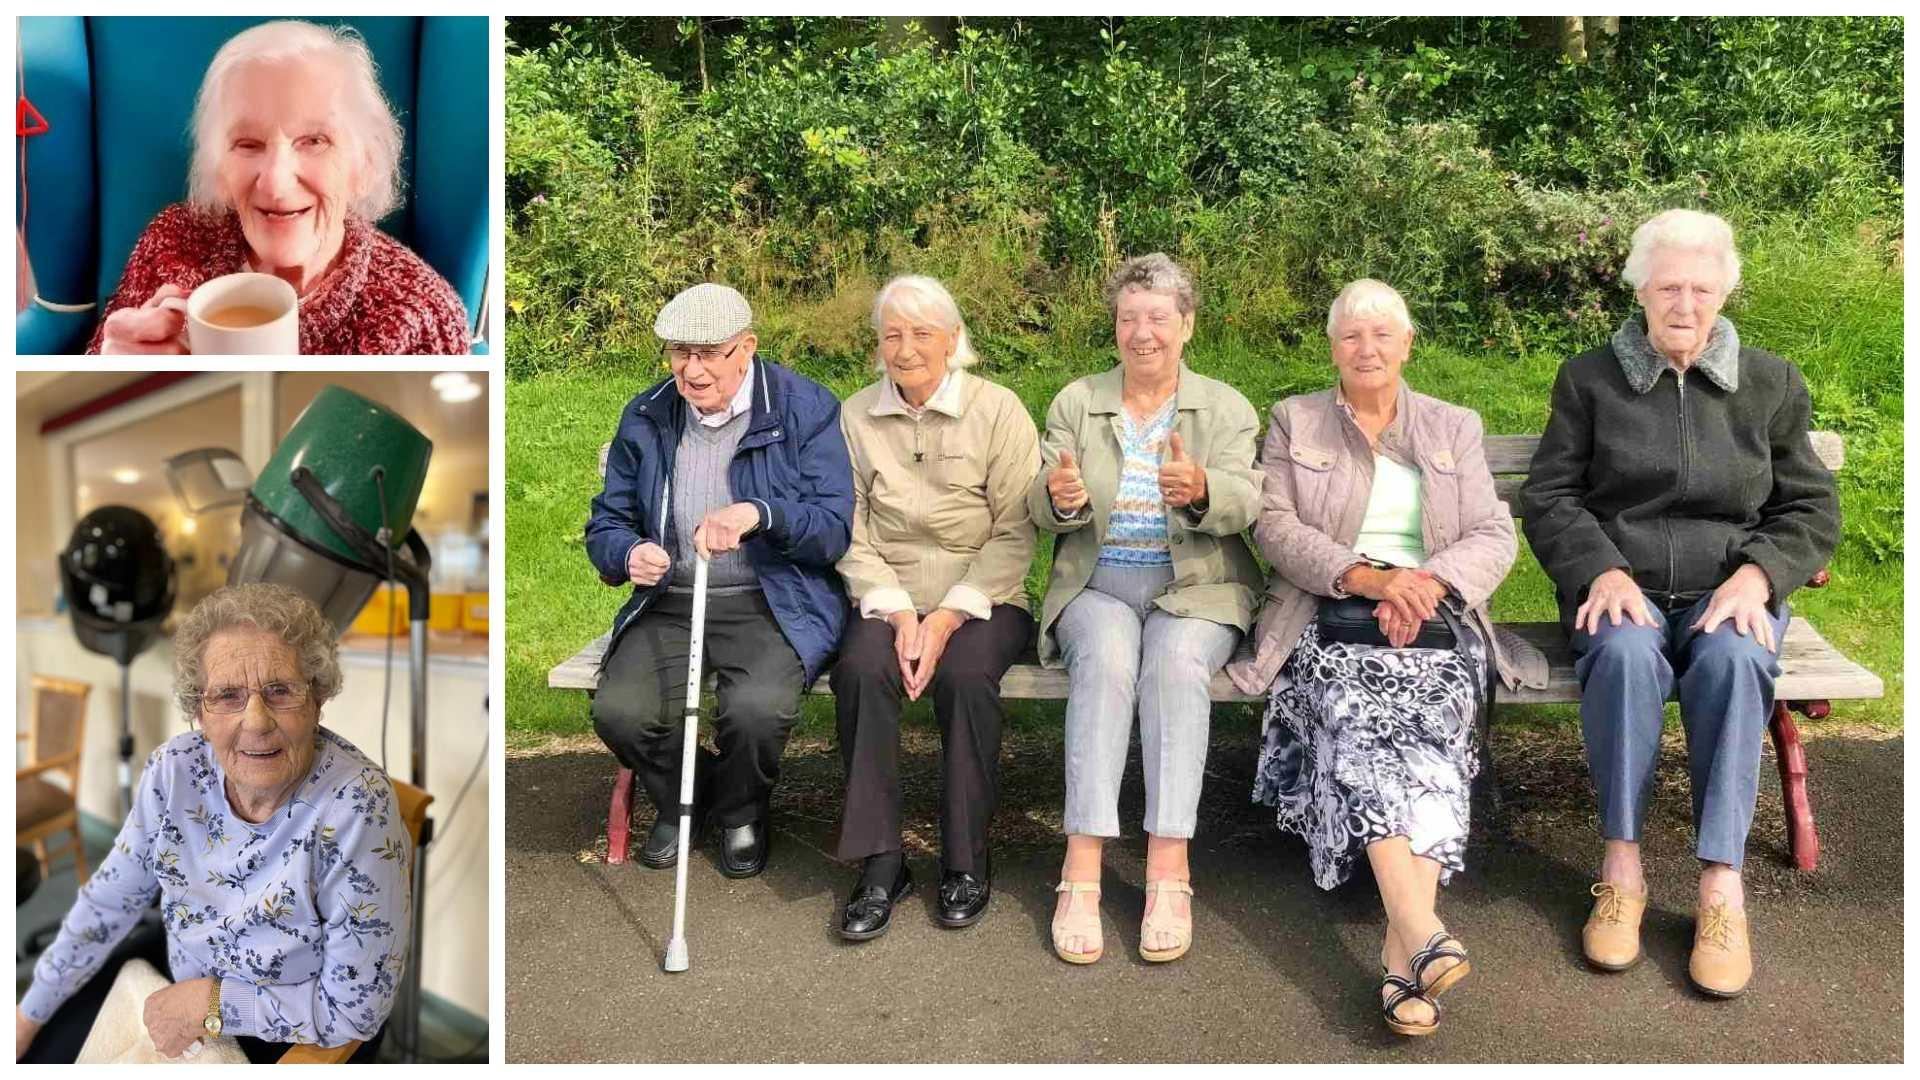 residents in the care home garden